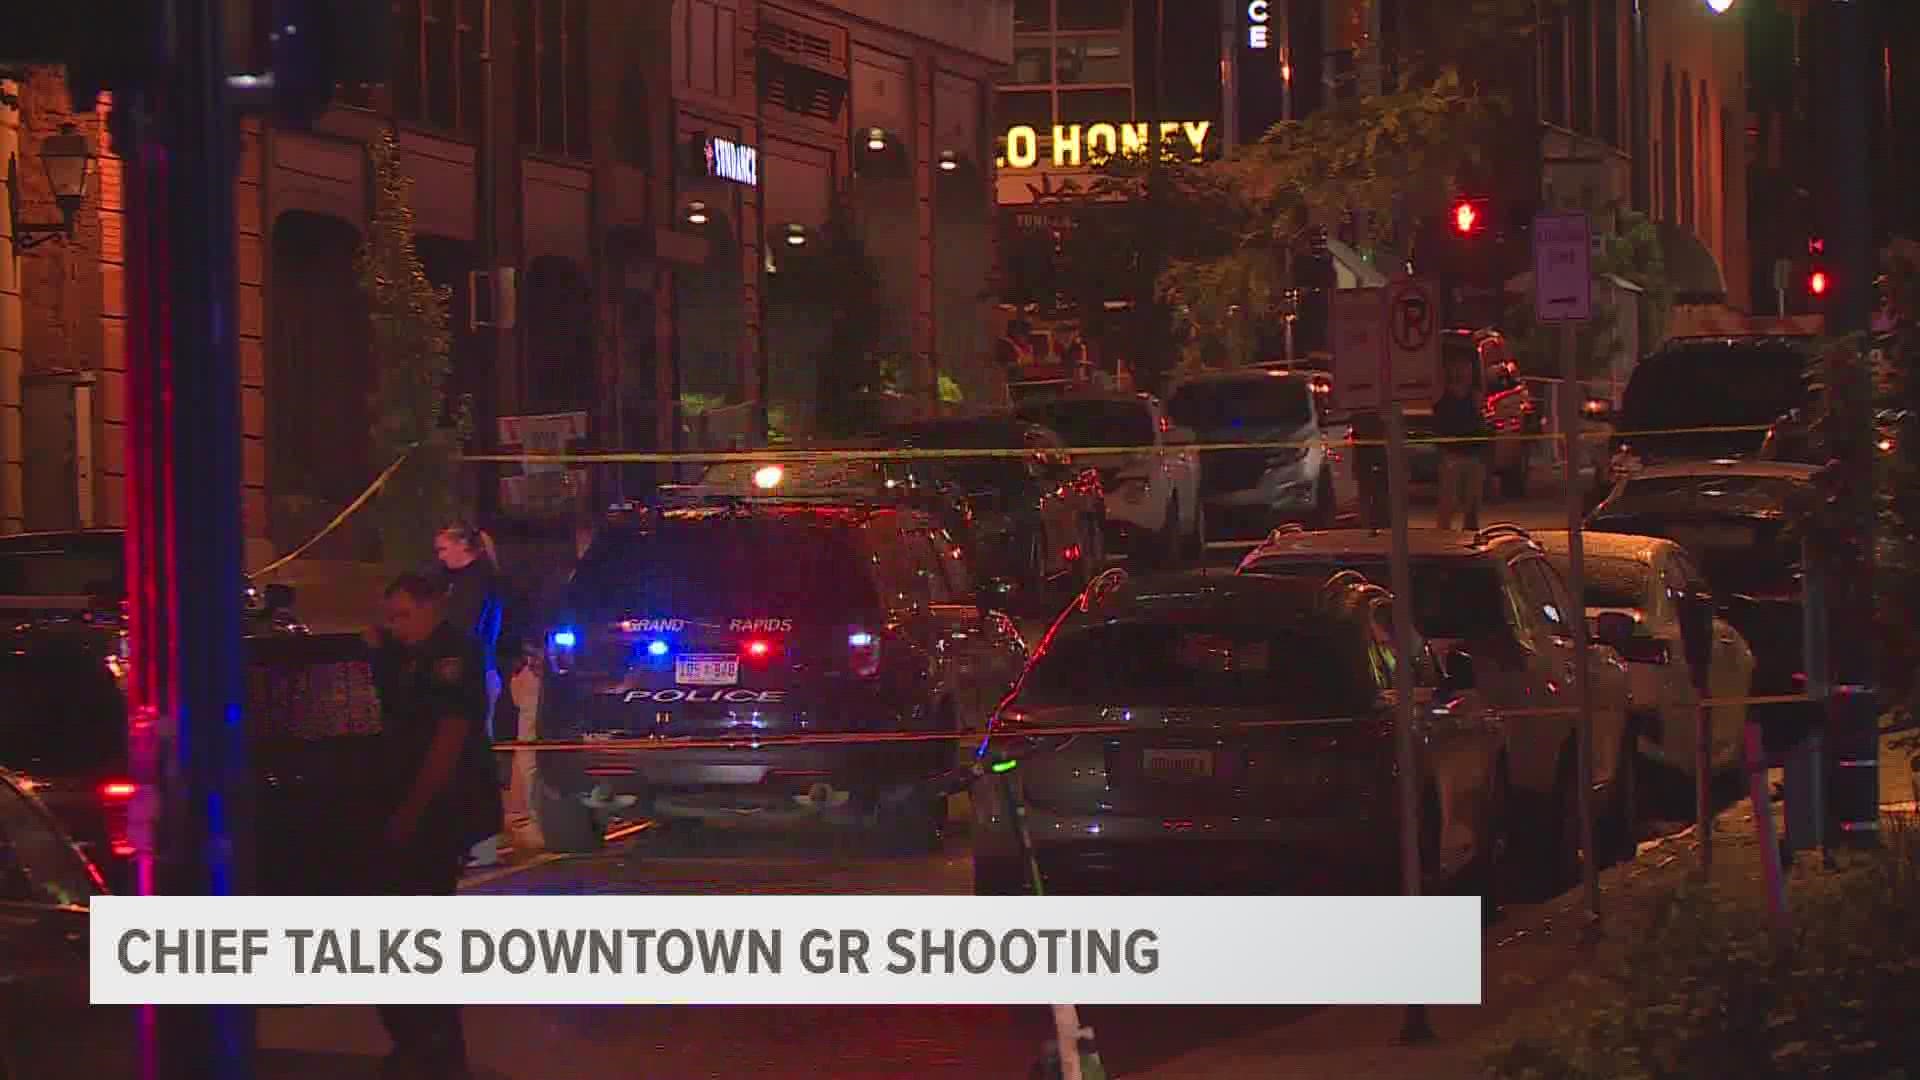 The Grand Rapids Police Chief says two groups of people got into an altercation before it turned into gunfire downtown overnight Sunday.